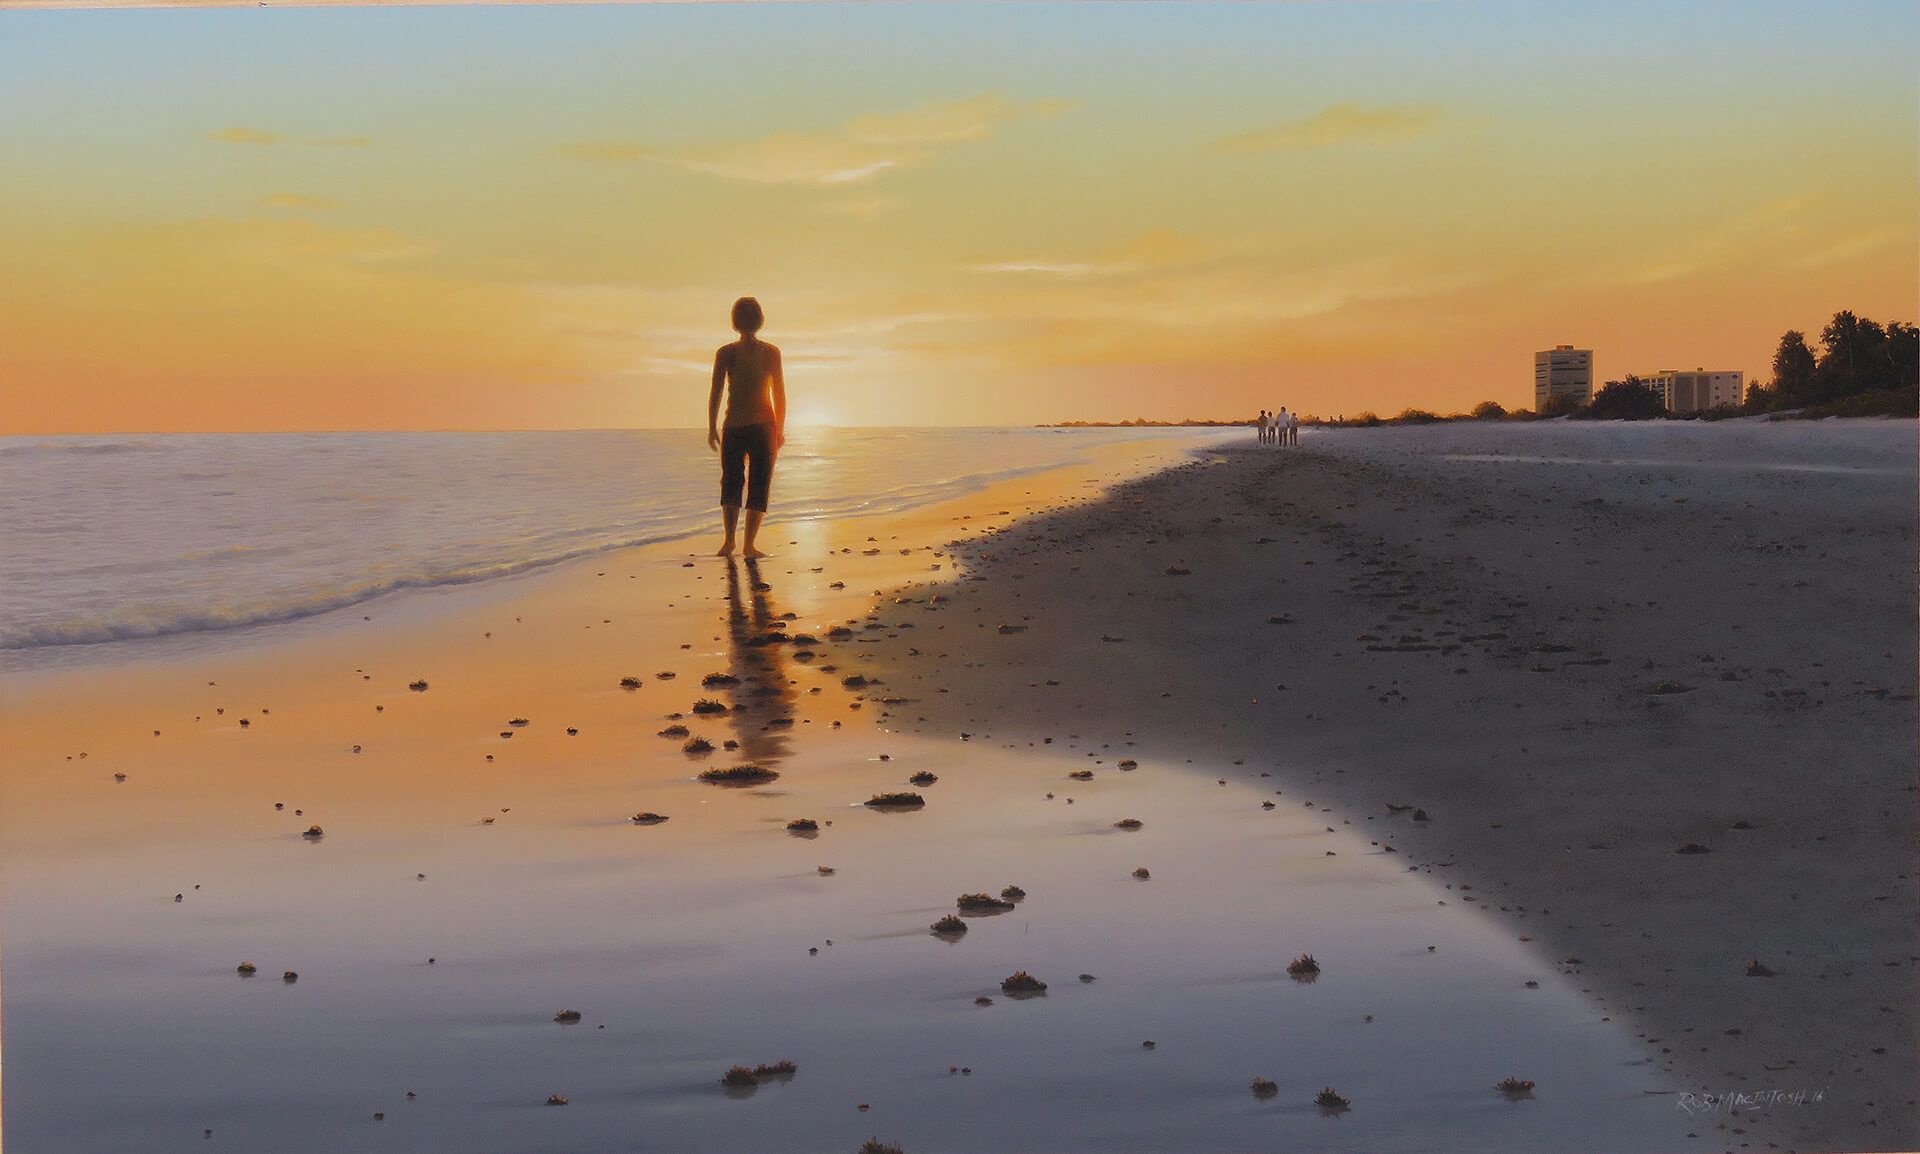 Photorealistic painting of a sunset on Siesta Beach